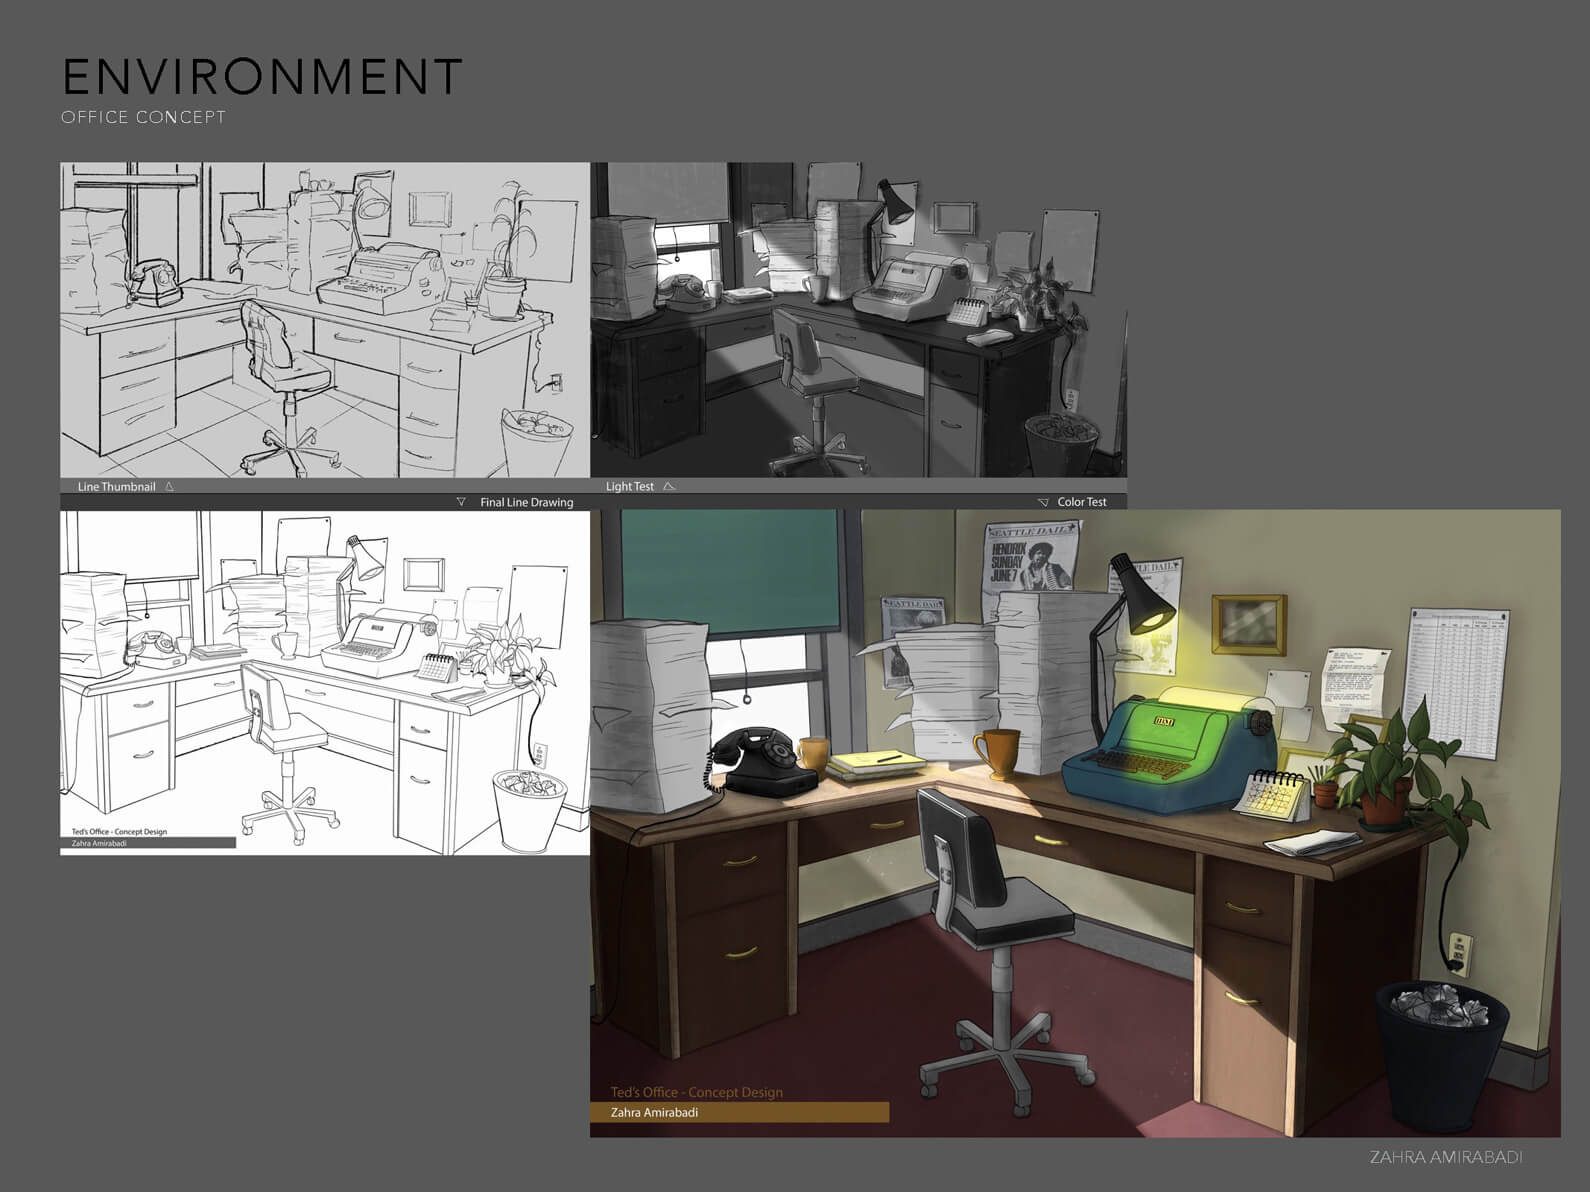 Concept sketches and drawings of the interior office set in Orientation Center for the Unseen